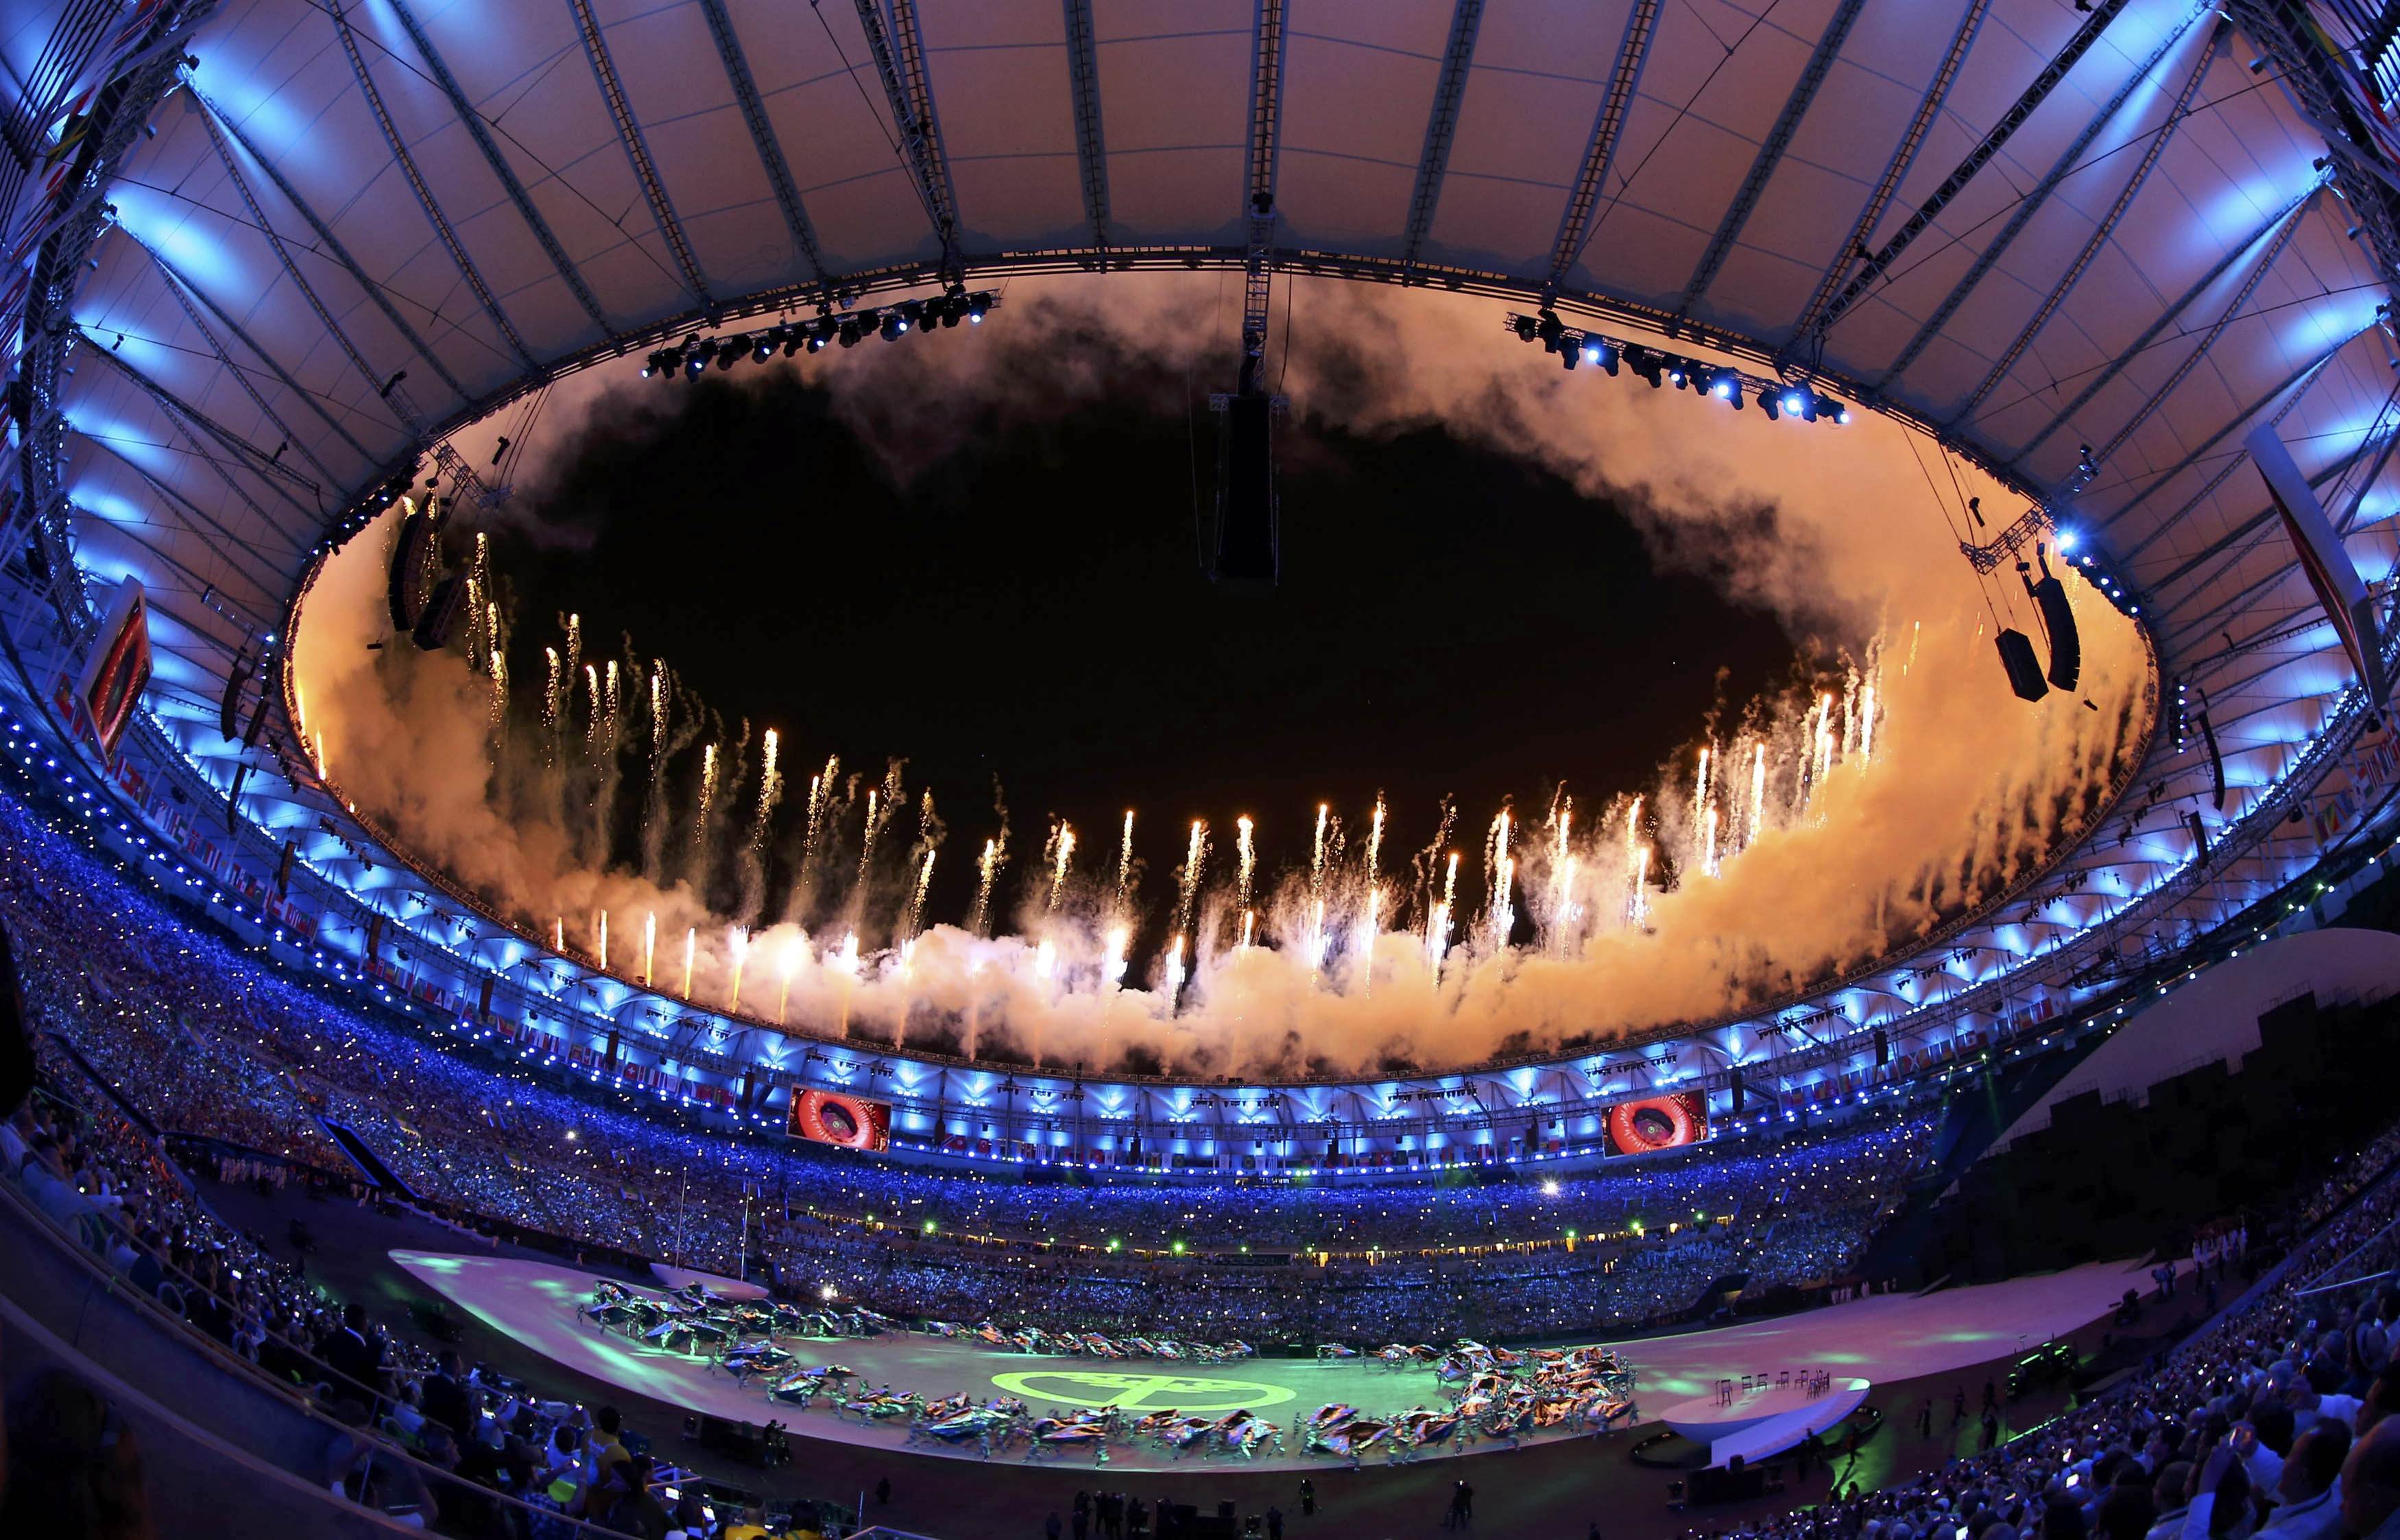 2016 Rio Olympics - Opening ceremony - Maracana - Rio de Janeiro, Brazil - 05/08/2016. Fireworks explode during the opening ceremony. Picture taken with a fisheye lens REUTERS/Ivan Alvarado FOR EDITORIAL USE ONLY. NOT FOR SALE FOR MARKETING OR ADVERTISING CAMPAIGNS